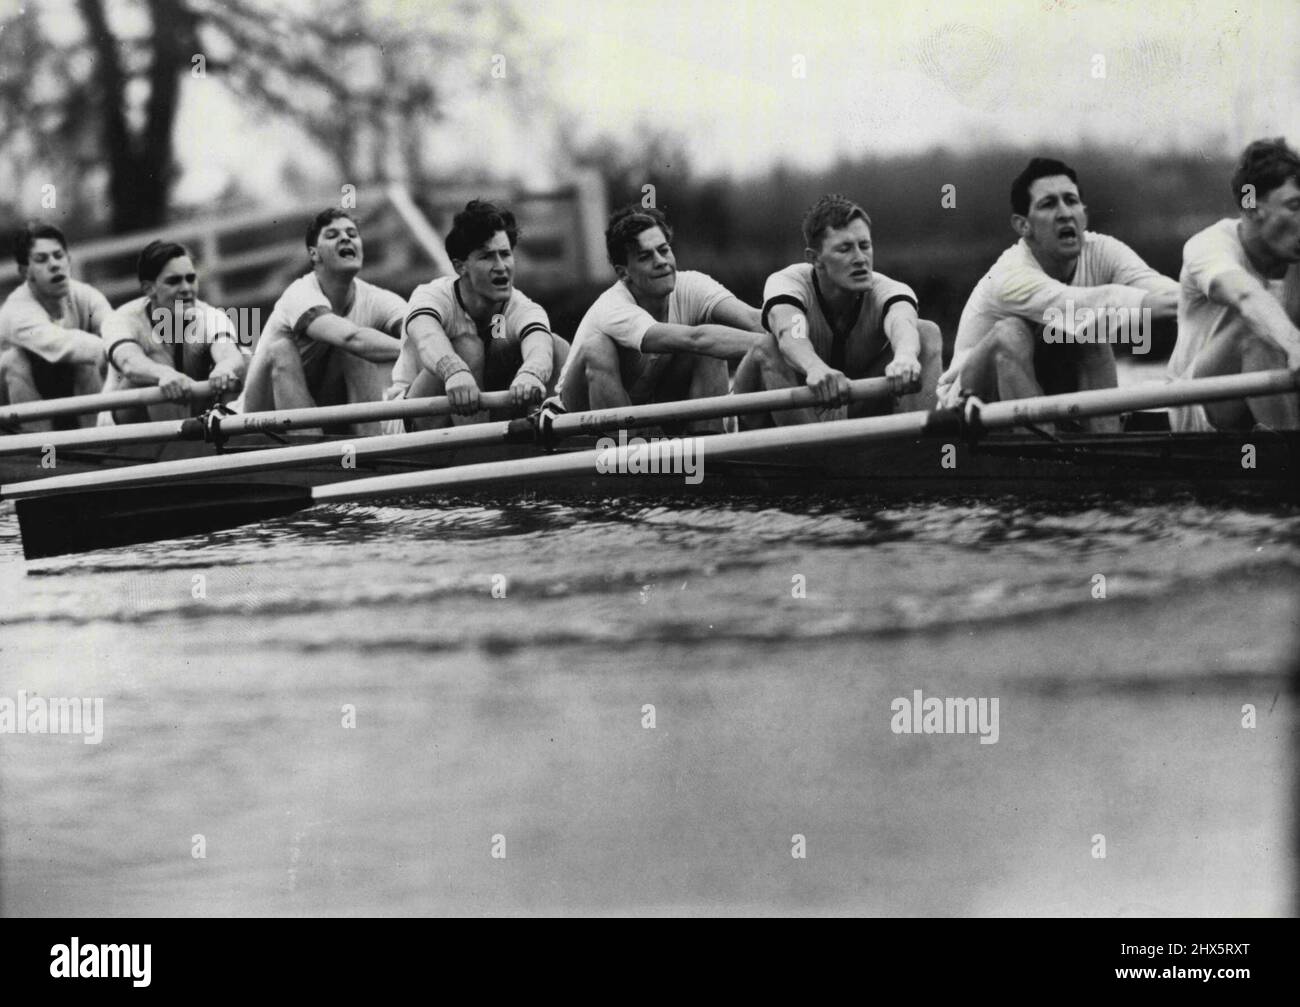 Dark Blues In Training -- A study in expressions from the Dark Blues as they train in rough water at Wallingford. From left they are: M.I. Ross (rowing in place of Gobbo who has influence): E.V. Vine: J.M. Wilson; D.P. Wells, a new 'Blue'; R.D.T. Raikes: J.G. McLeod: E.O.G. Rain. Although J.A. Gobbe, The Australian President of the Oxford University Boat Club, has selected his crew for the Boat Race, he has not finally decided upon seating positions, and the Eight are still being 're-shuffled' during training, to ensure that the best possible combination meets Cambridge. February 24, 1955. Stock Photo